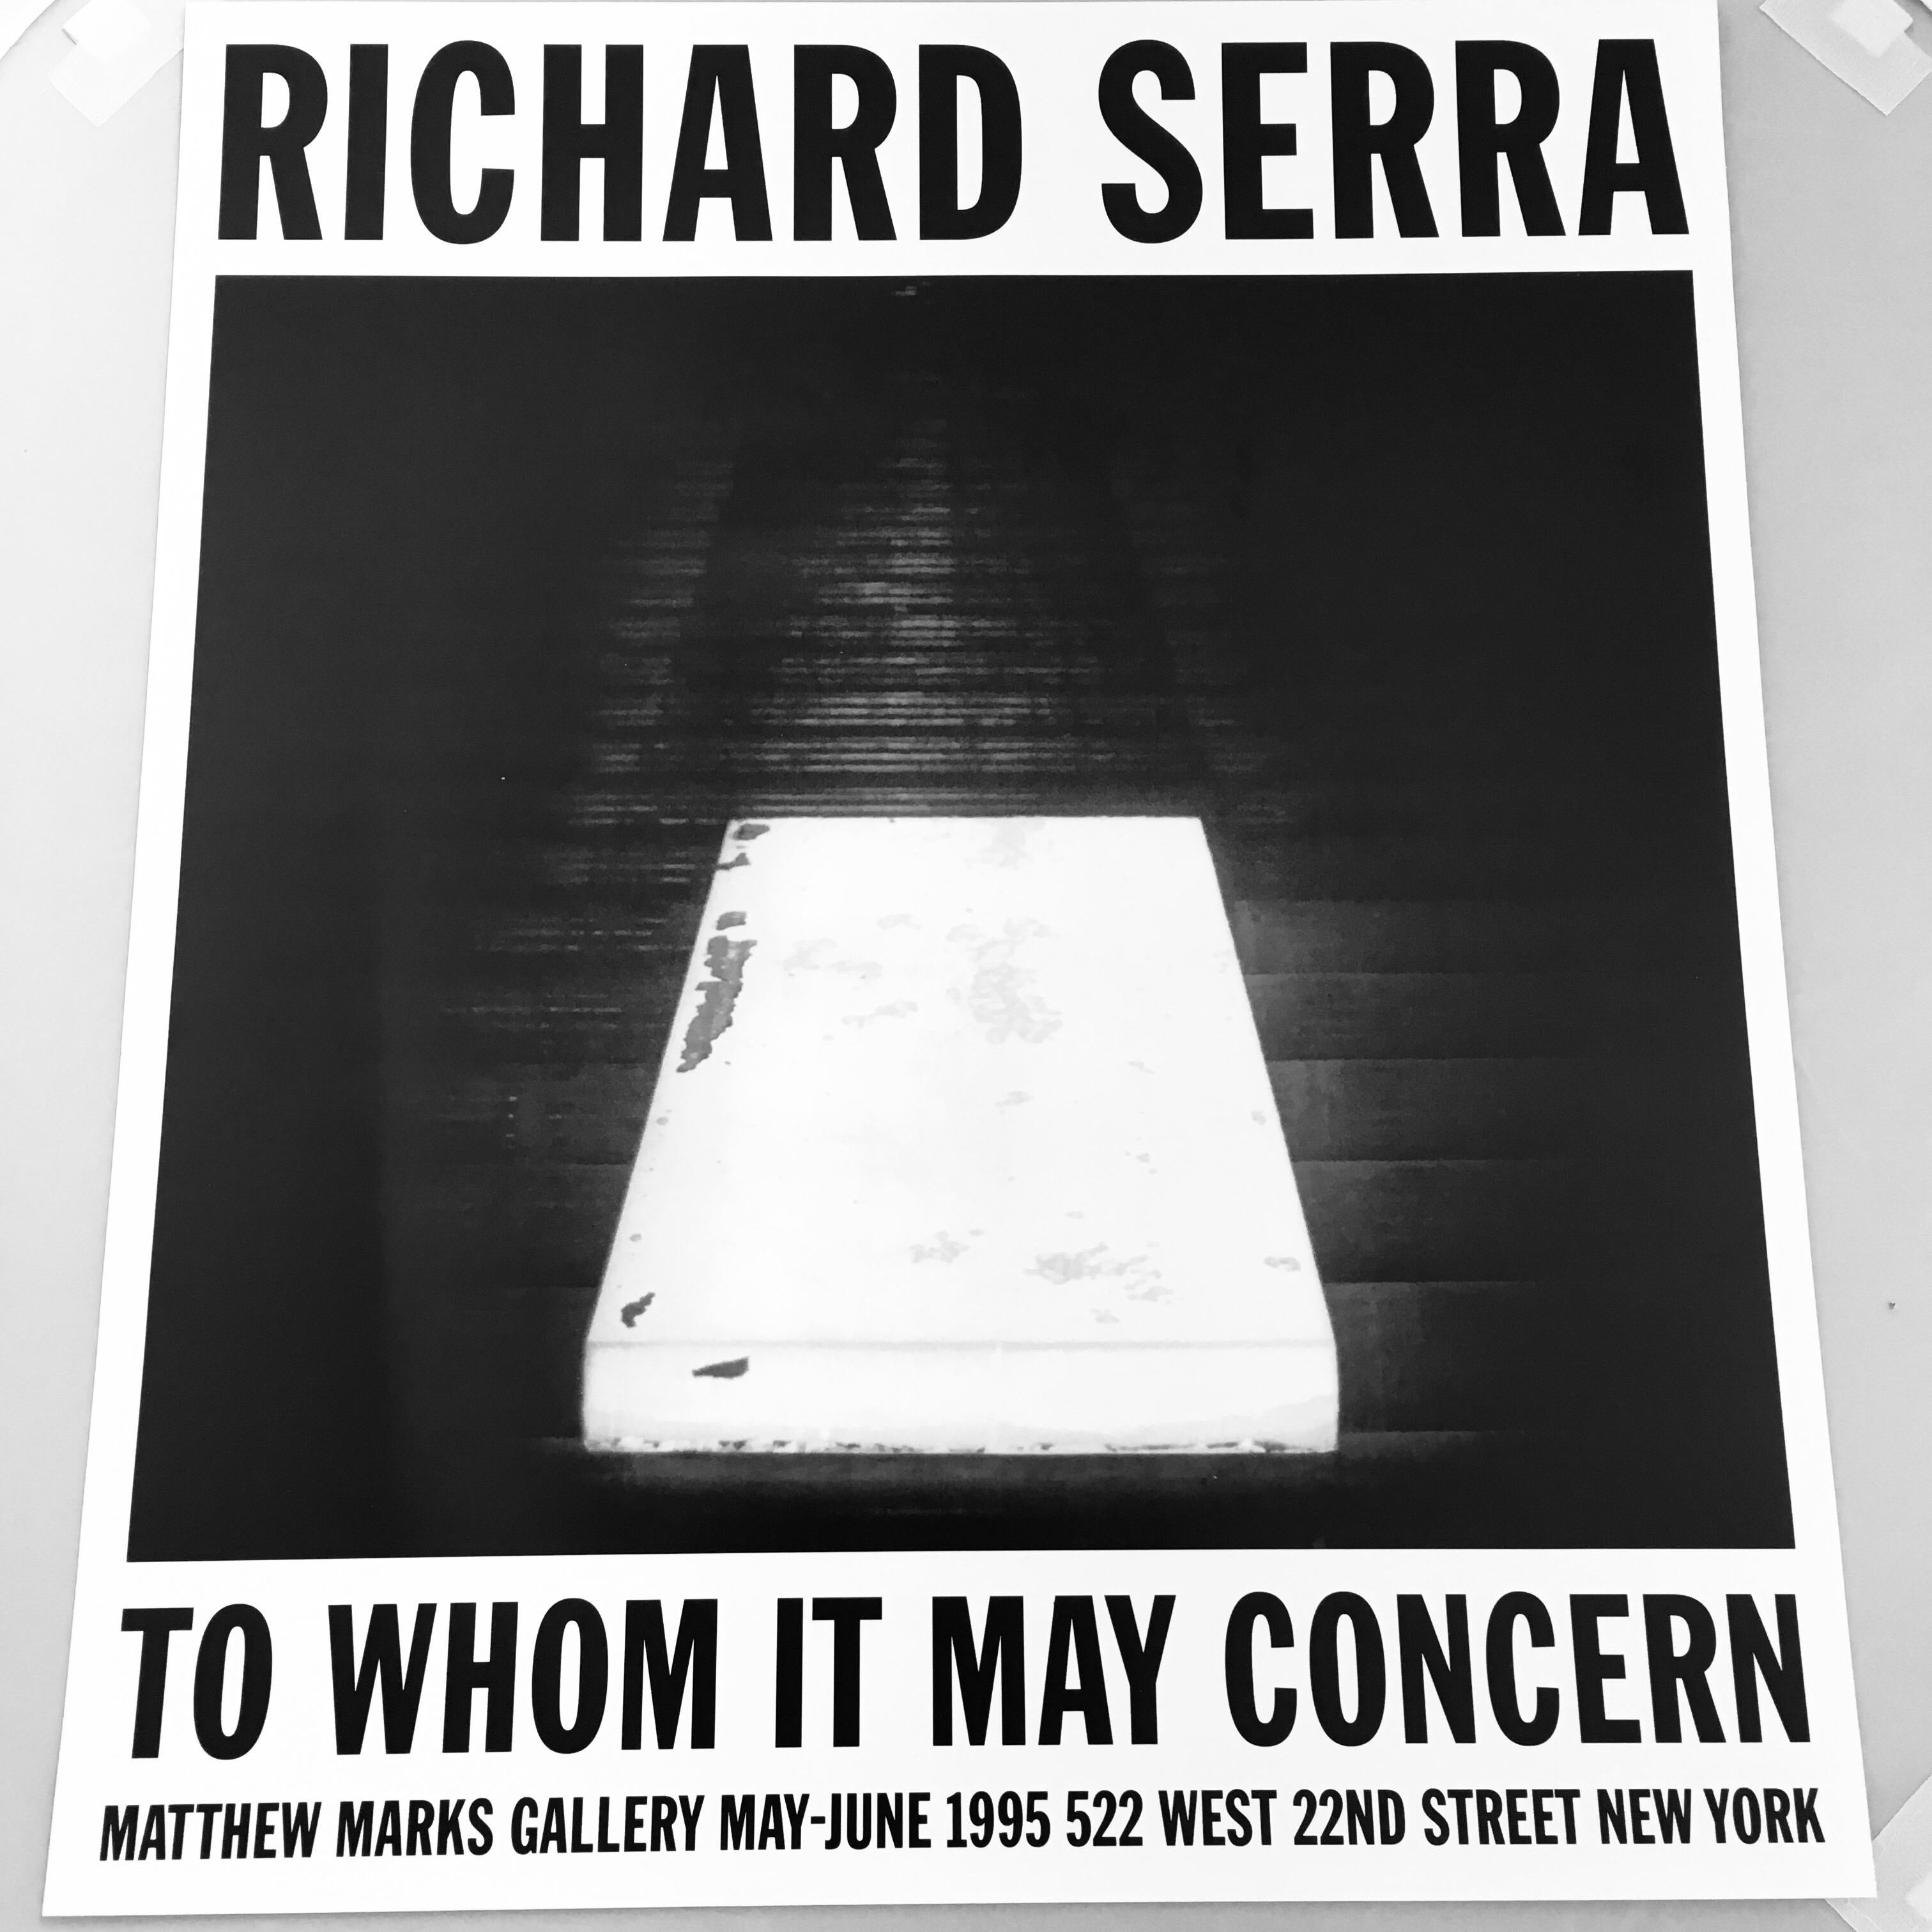 Vintage Richard Serra exhibition poster.
Produced in 1995, in conjunction with To Whom It May Concern at Matthew Marks. Gallery, New York (522 W 22 Street).

Measures: 21 x 18 inches; 53.3 x 45.7 cm
Very good condition
Unsigned.
Sold unframed.